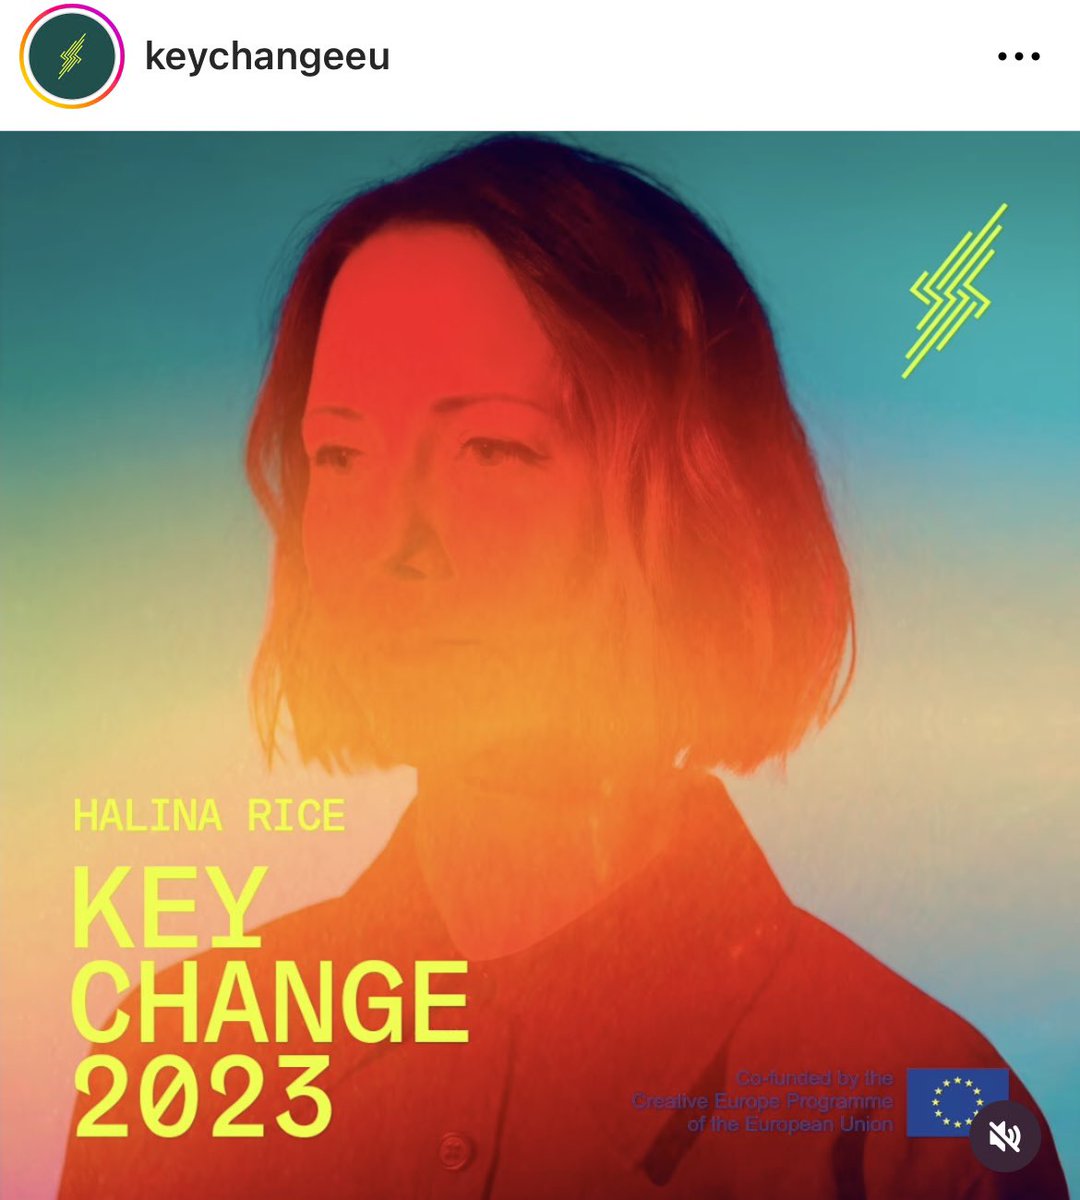 I’m so grateful to be selected for @KeychangeEU 2023 in association with @PRSFoundation - supporting 74 artists across 12 countries on their talent development programme.
keychange.eu

#music #art #tech #keychange #representation #genderbalance #electronicmusicproducer